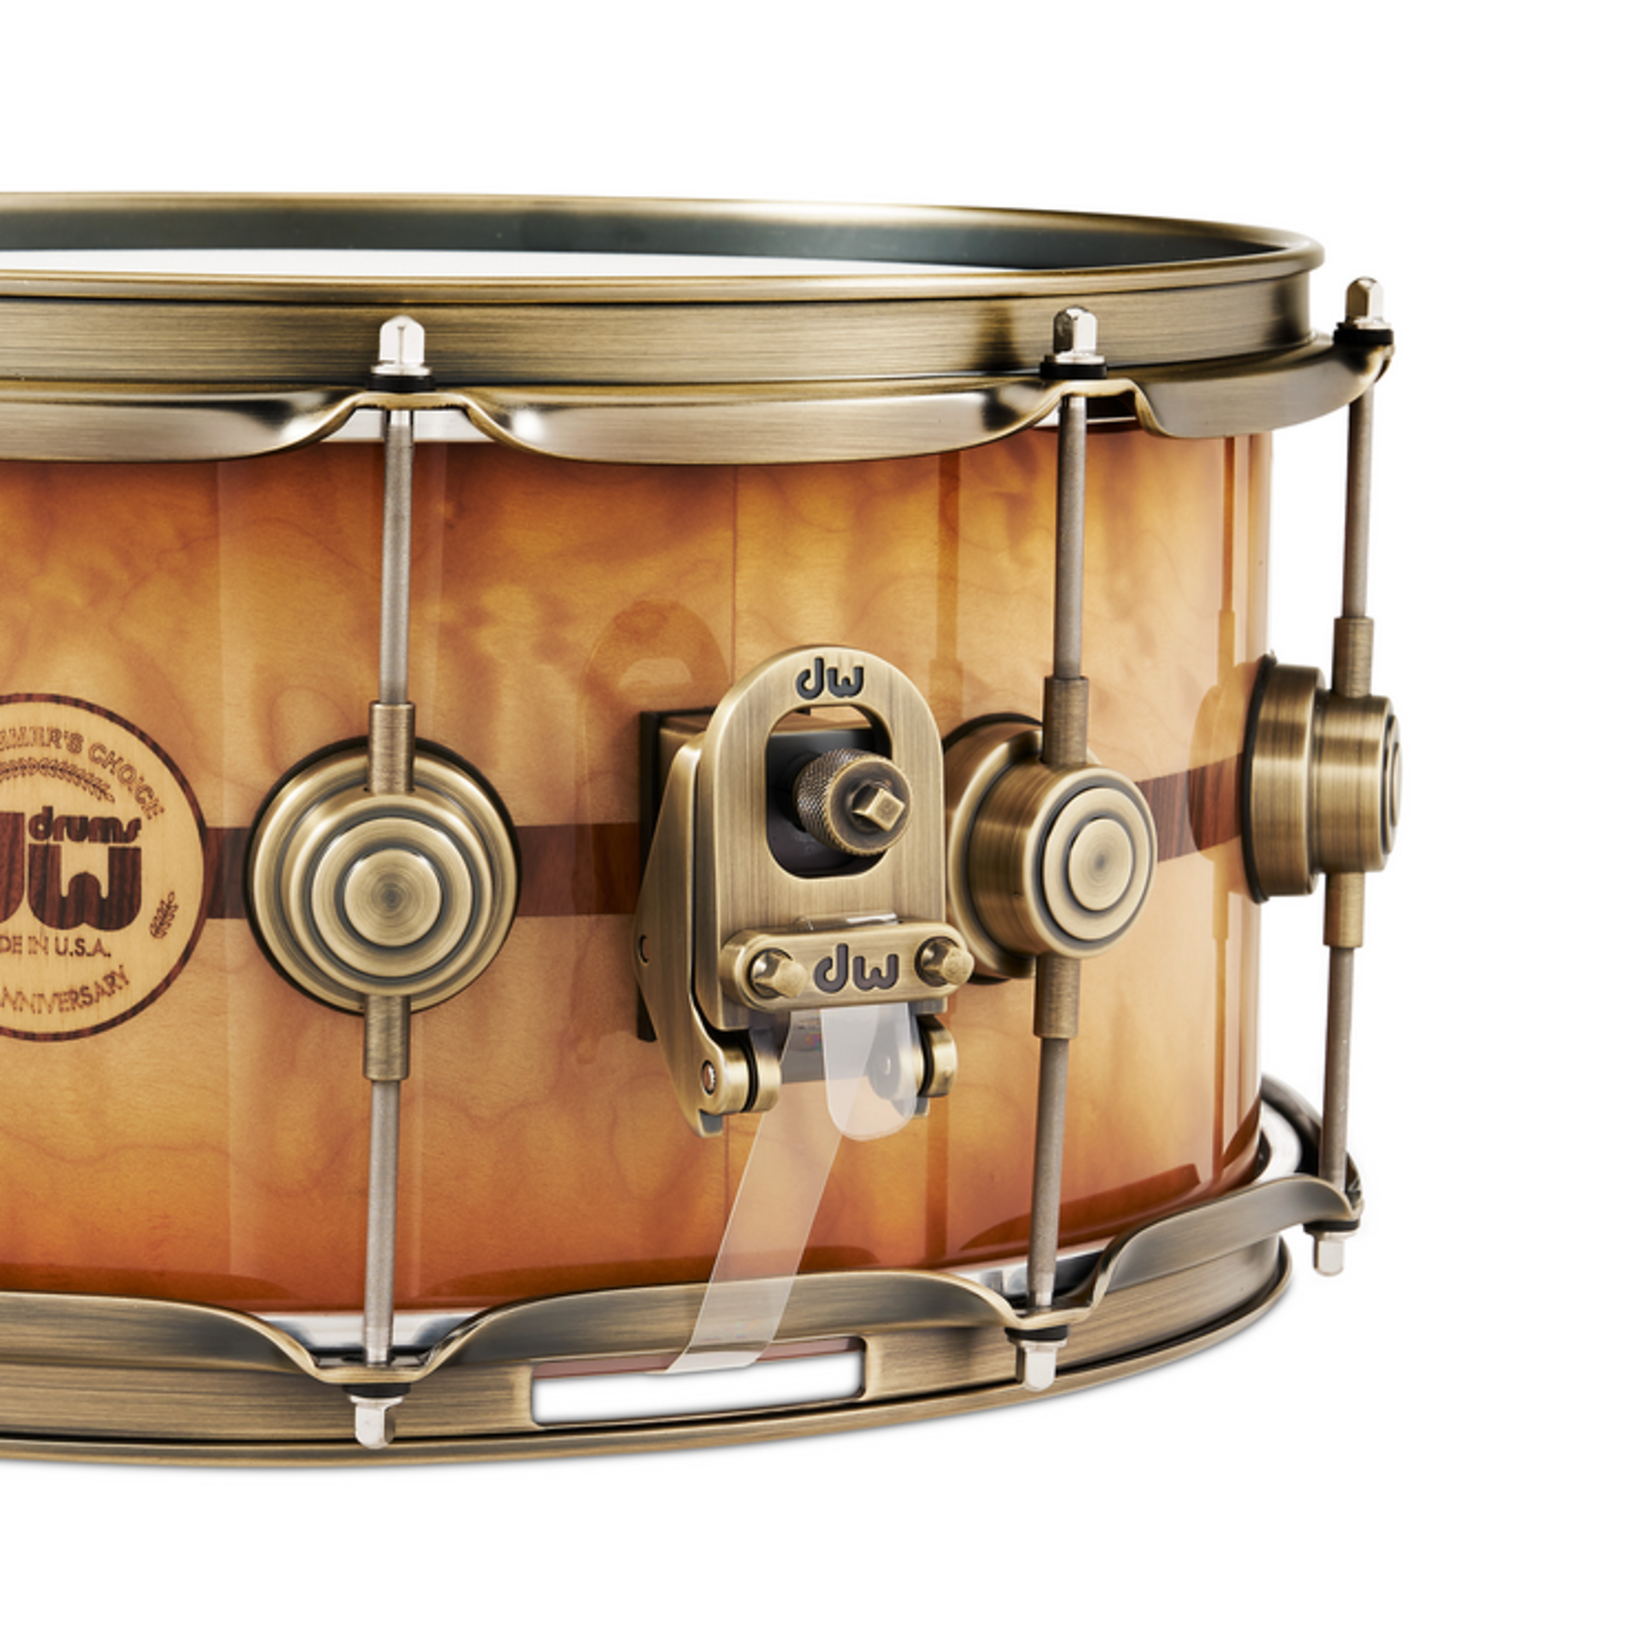 DW DW 50th Anniversary Collector's Limited Edition 6.5x14" Snare Drum